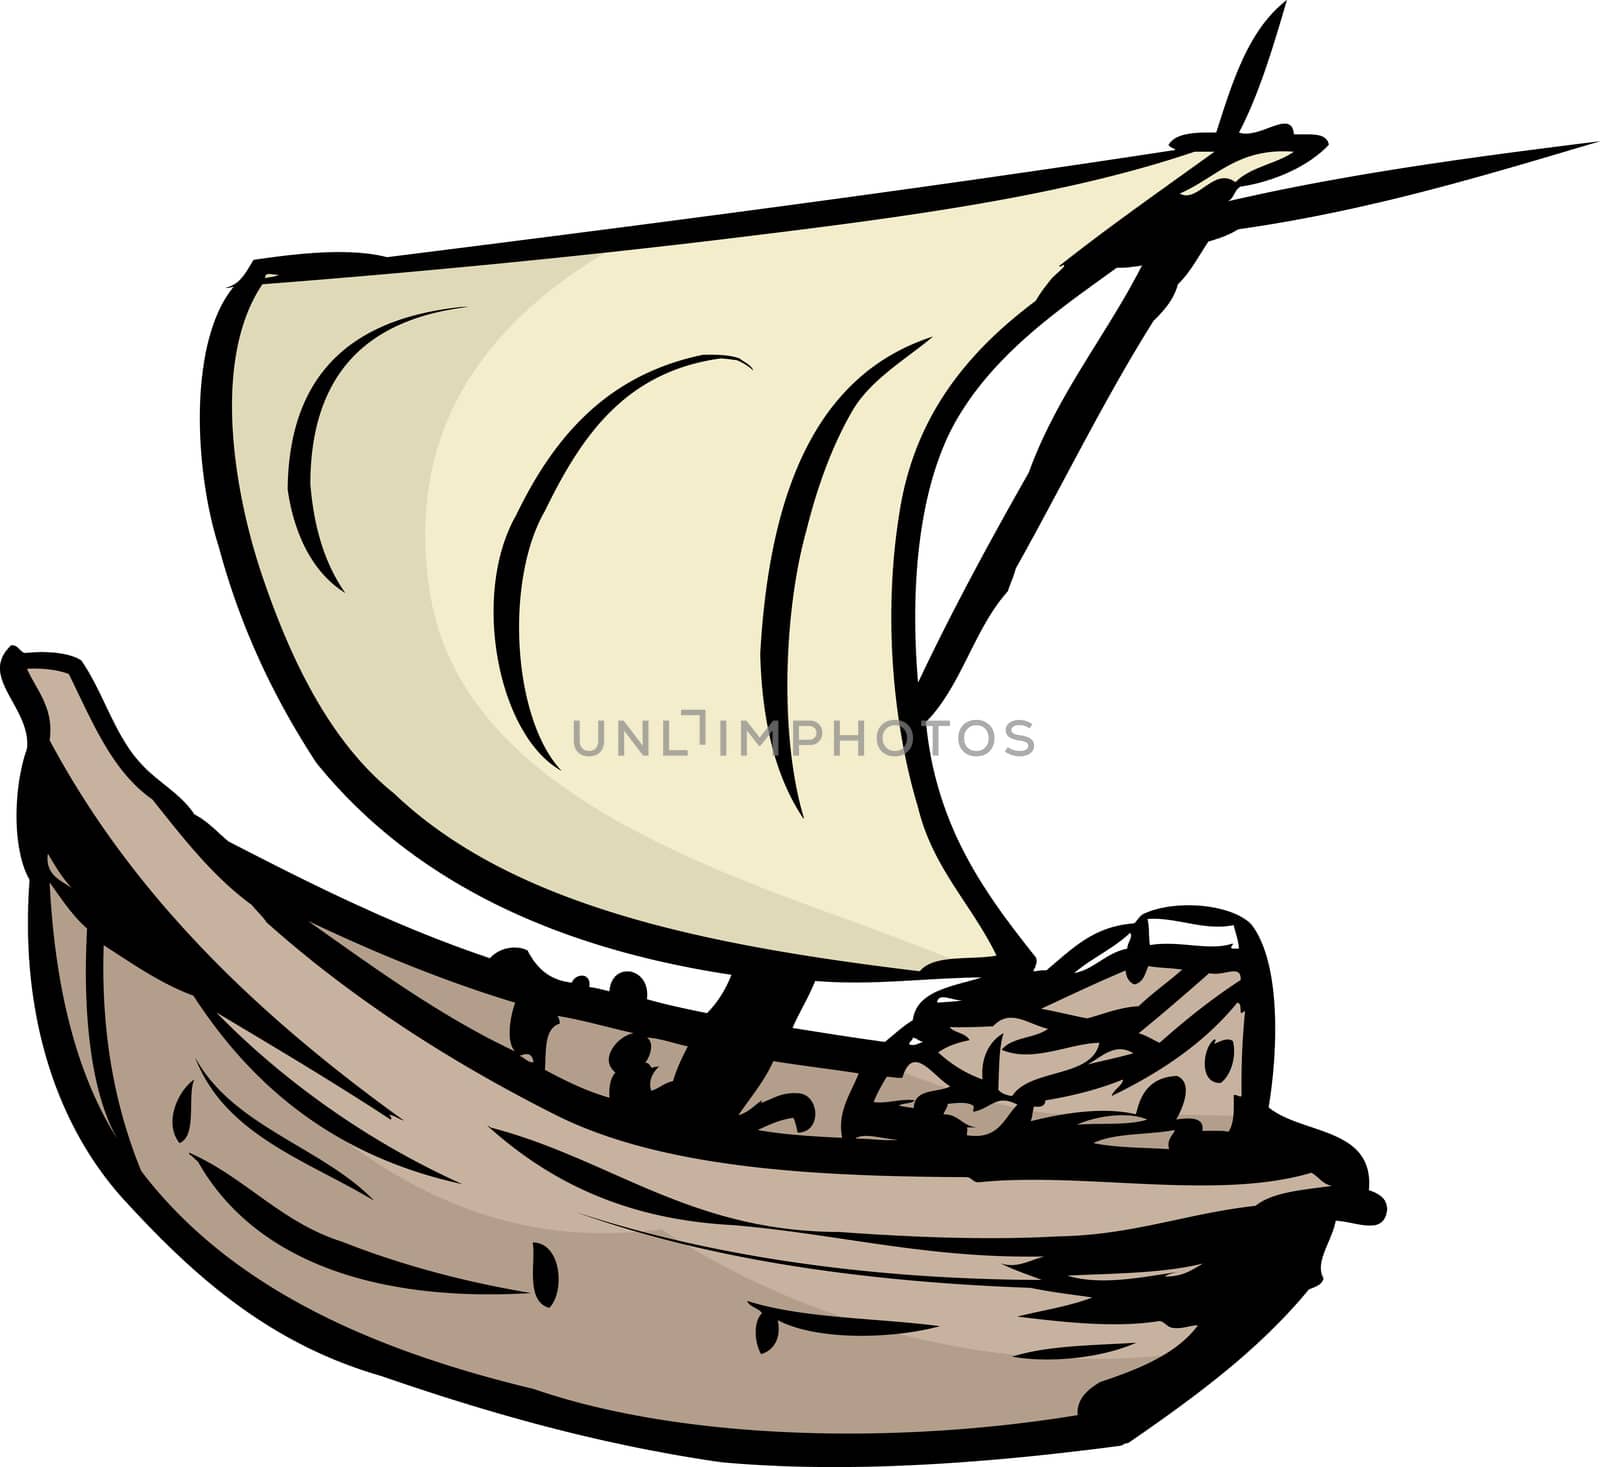 Single simple isolated clipper ship or sailboat over white background